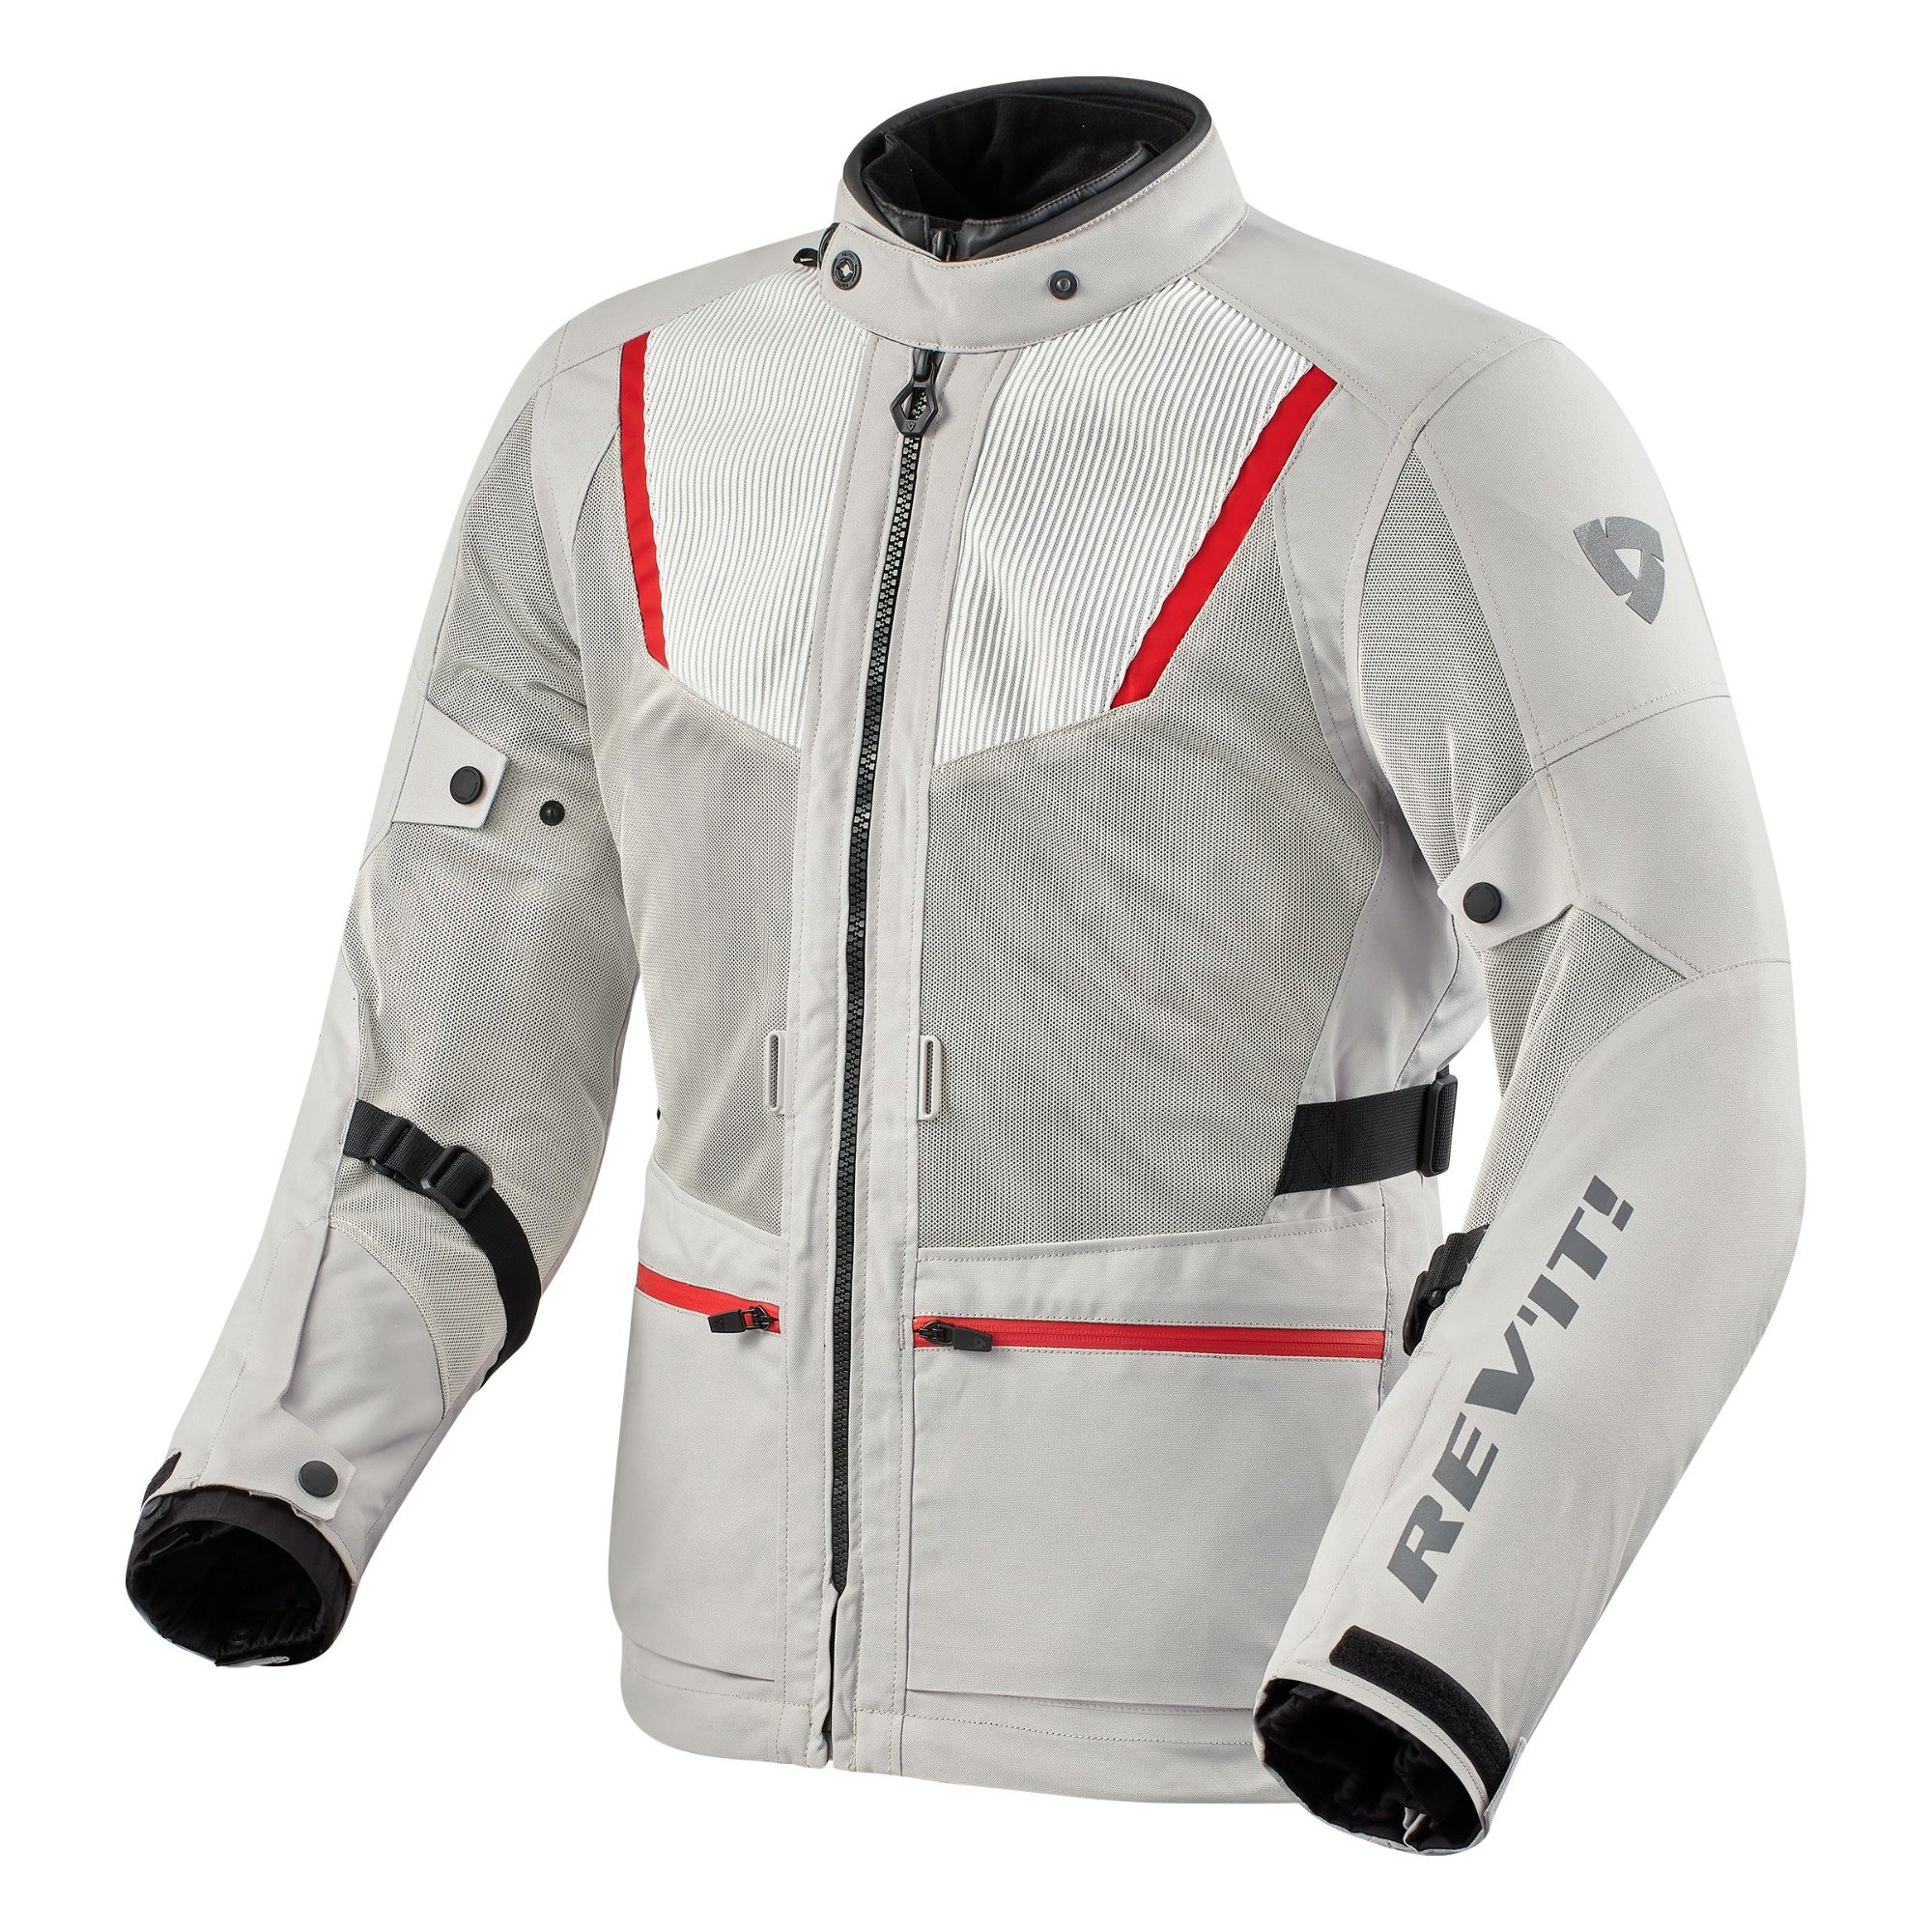 Image of REV'IT! Levante 2 H2O Jacket Silver Size 2XL ID 8700001346351